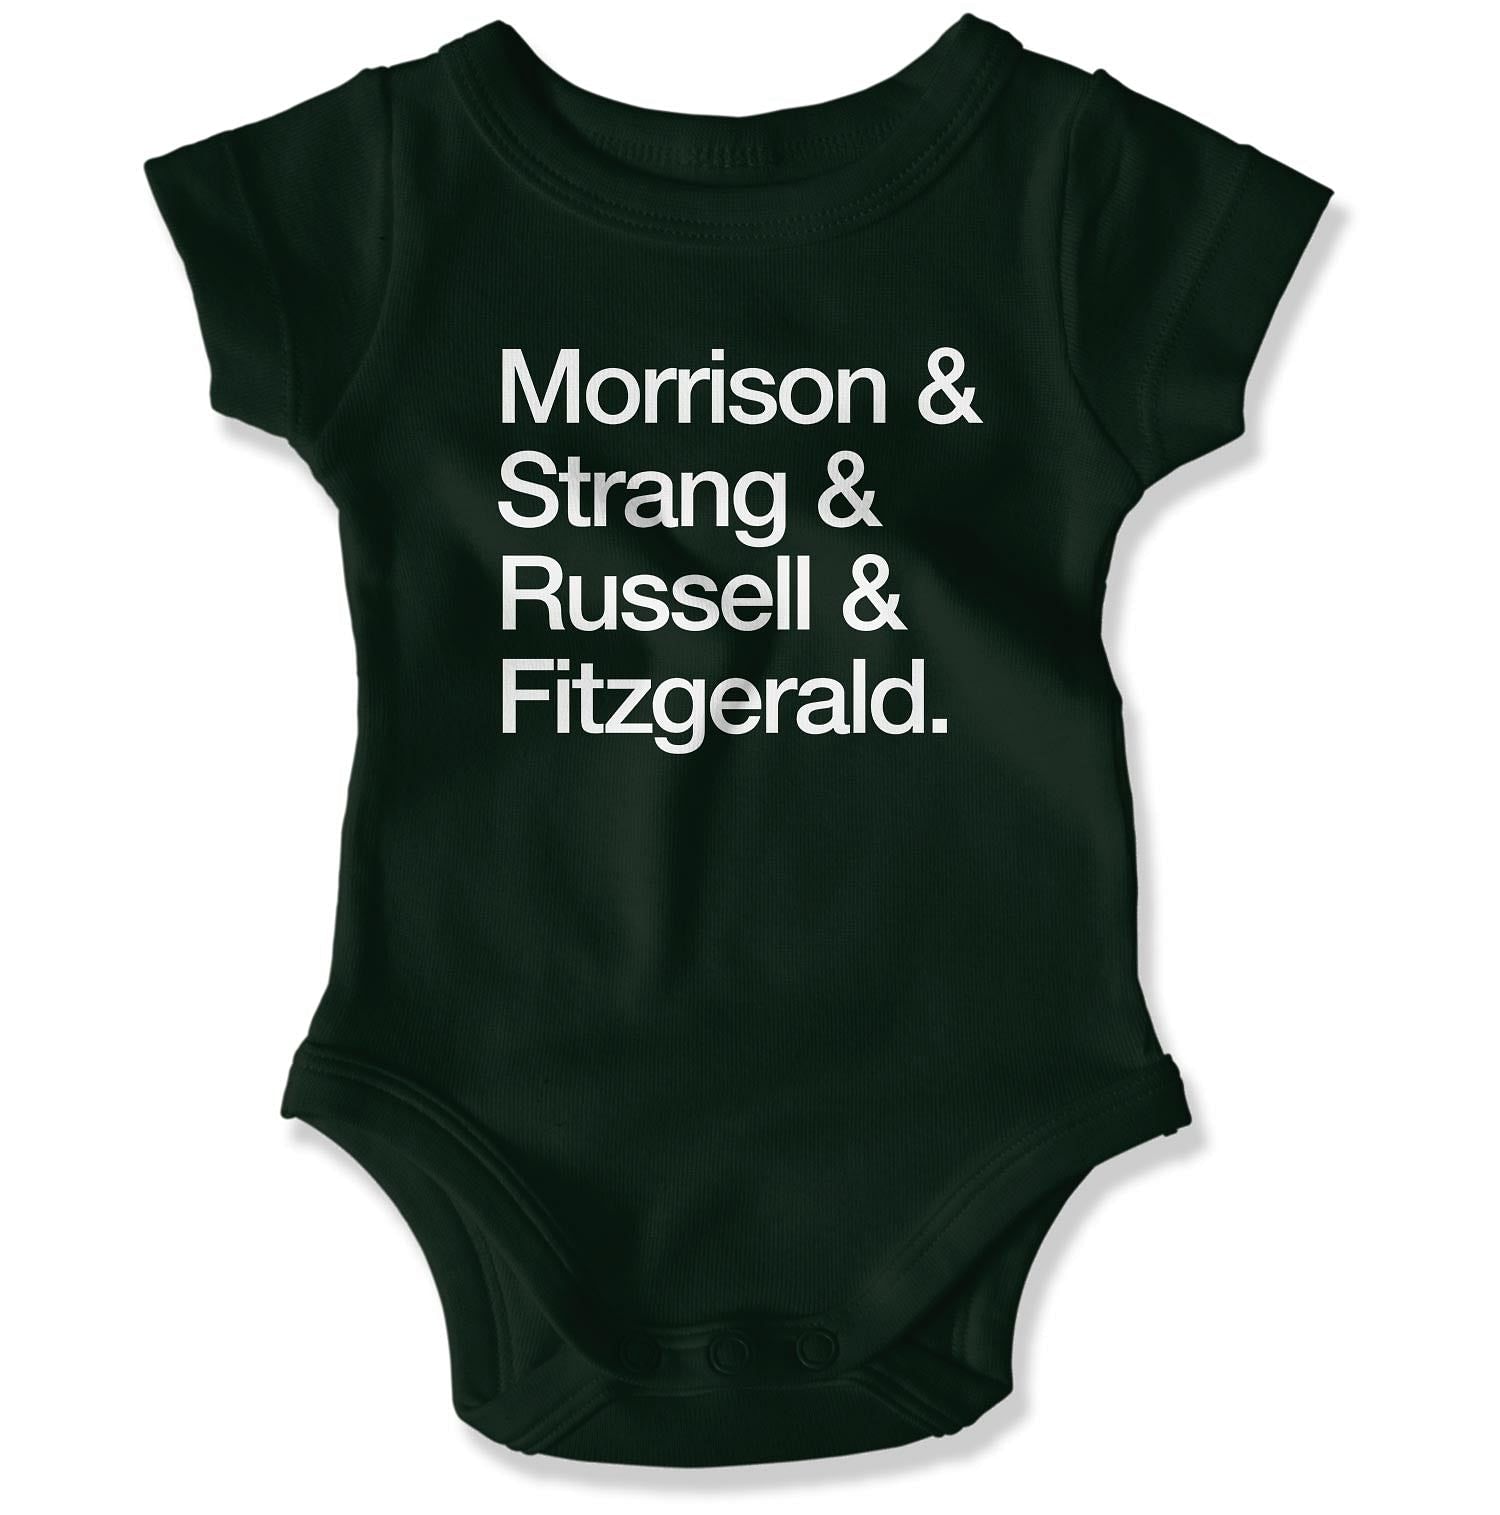 Atlantic COVID-19 Heroes Baby Onesie in Color: Forest Green - East Coast AF Apparel